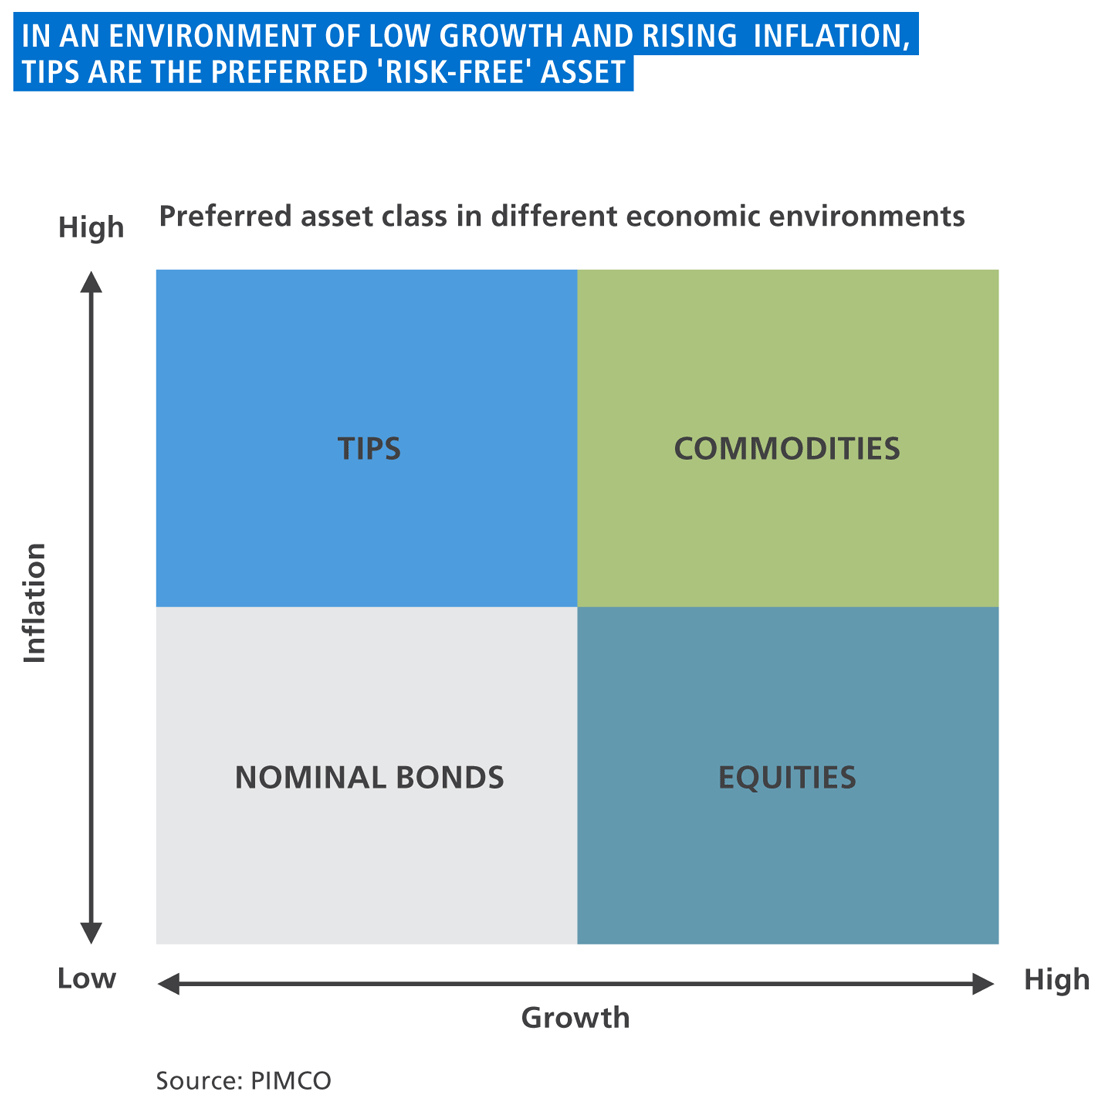 The figure shows an array of four asset classes in different economic environments, arranged by increasing growth on the X-axis and increasing inflation on the Y-axis. TIPs, in the top left quadrant, are preferred when inflation is high and growth is low. Commodities, in the upper right corner, are preferred in high inflation and high growth environments. For equities, on the lower right, are favored in low inflation and high growth periods. And for nominal bonds, on the lower left, it’s low growth and low inflation.